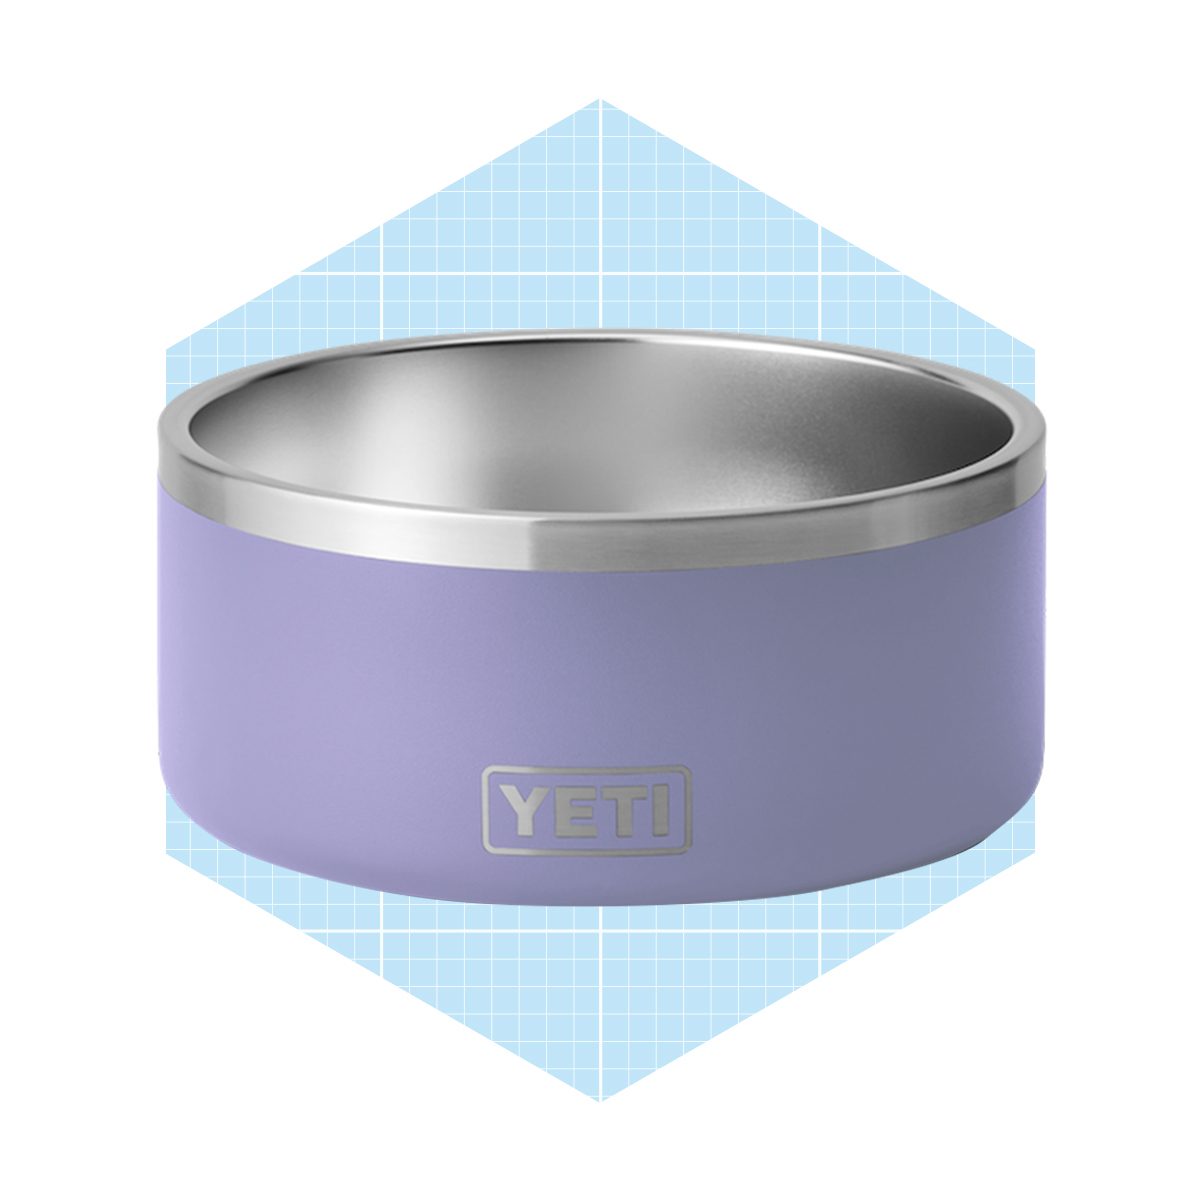 Yeti restocks its limited-edition Cosmic Lilac color collection 